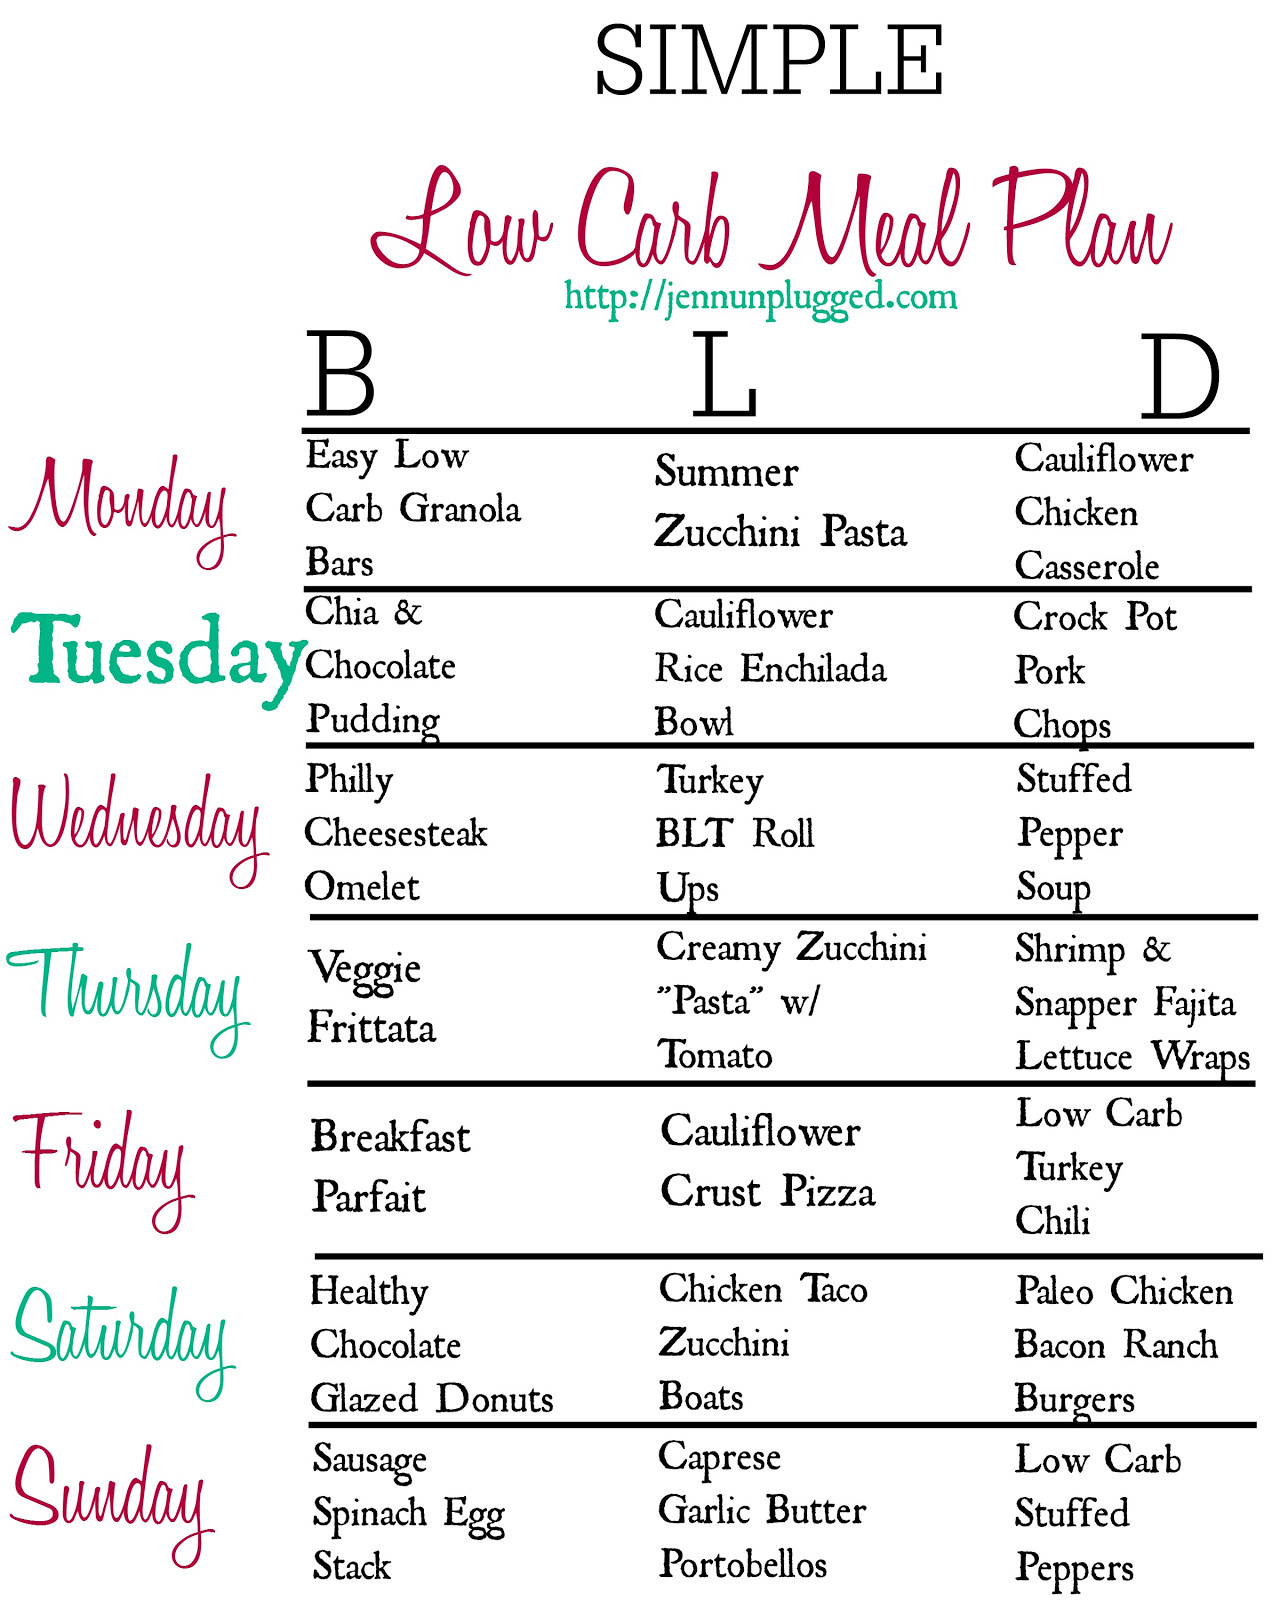 Weight Loss Meal Plans For Women Low Carb
 Pin on KETO & LOW CARB FOOD INFO